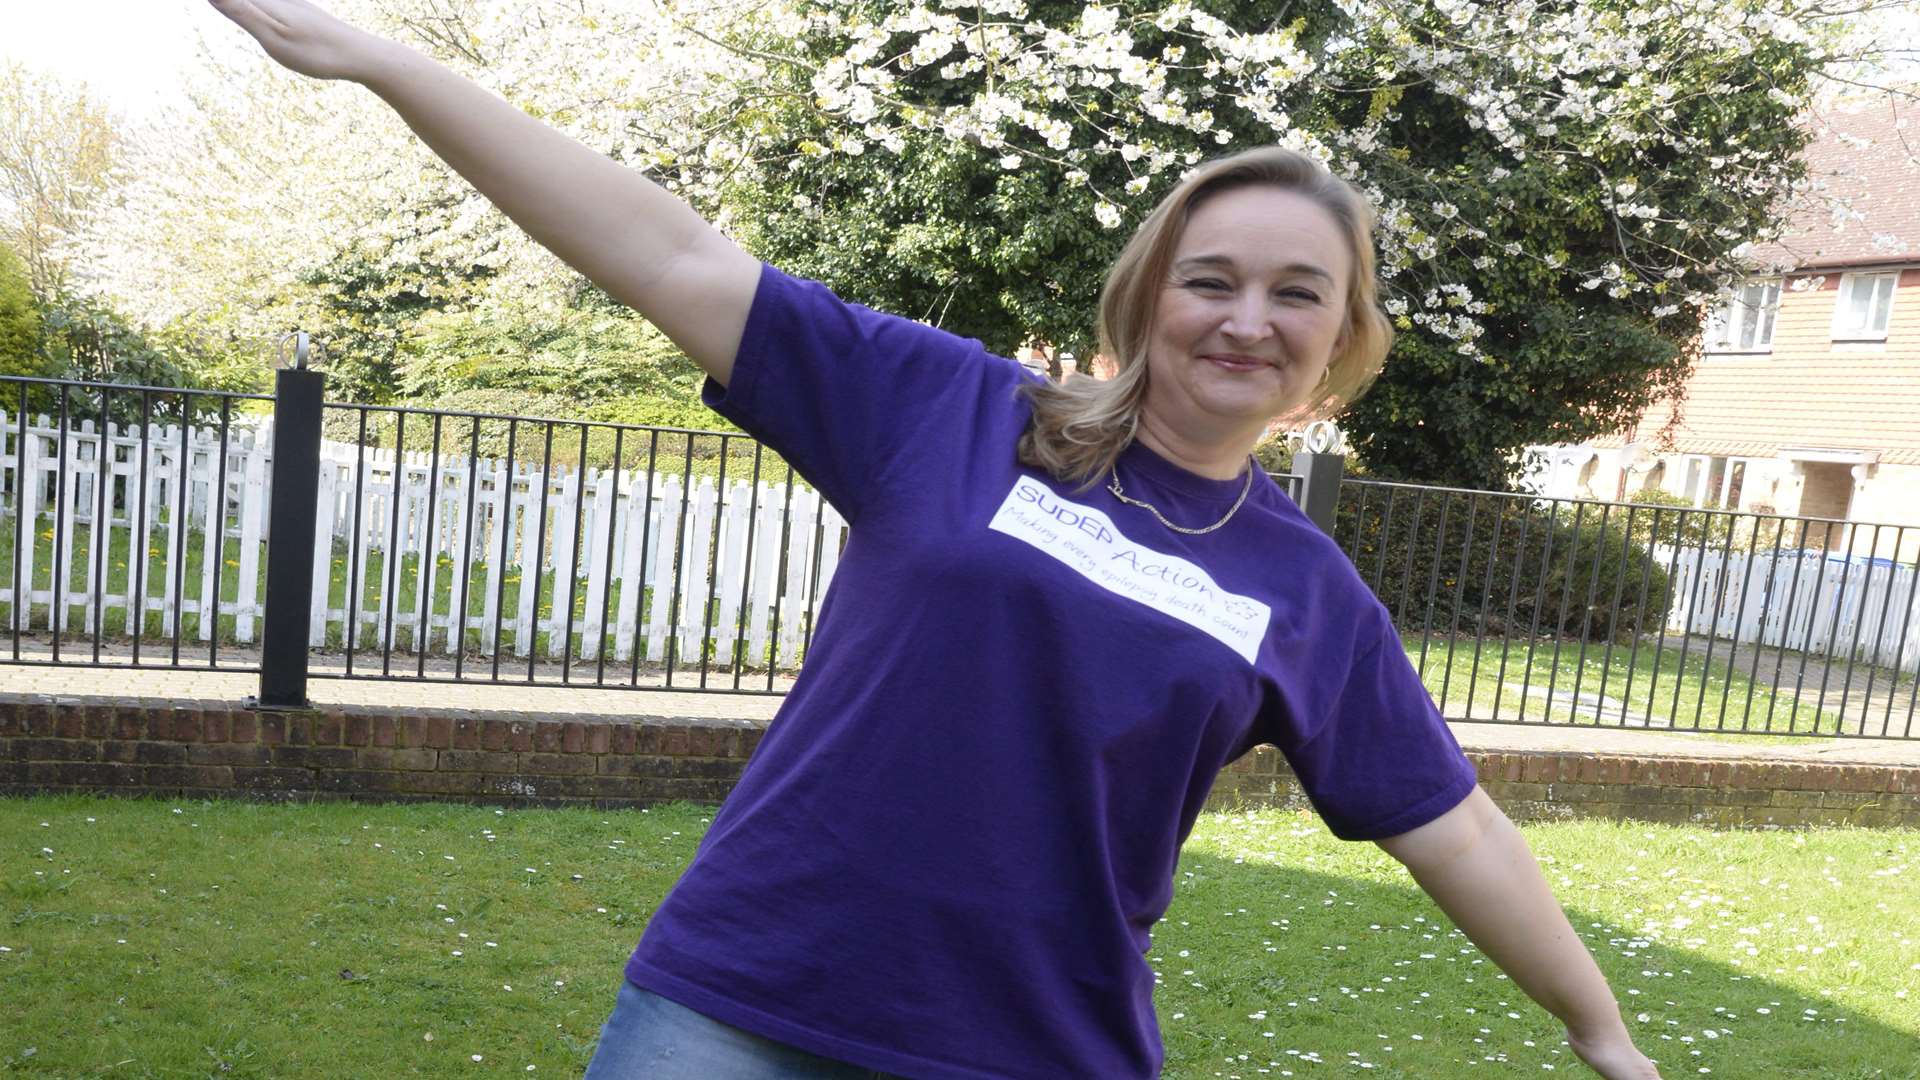 Nic May will wing walk in memory of her sister Samantha who passed away 10 years ago.